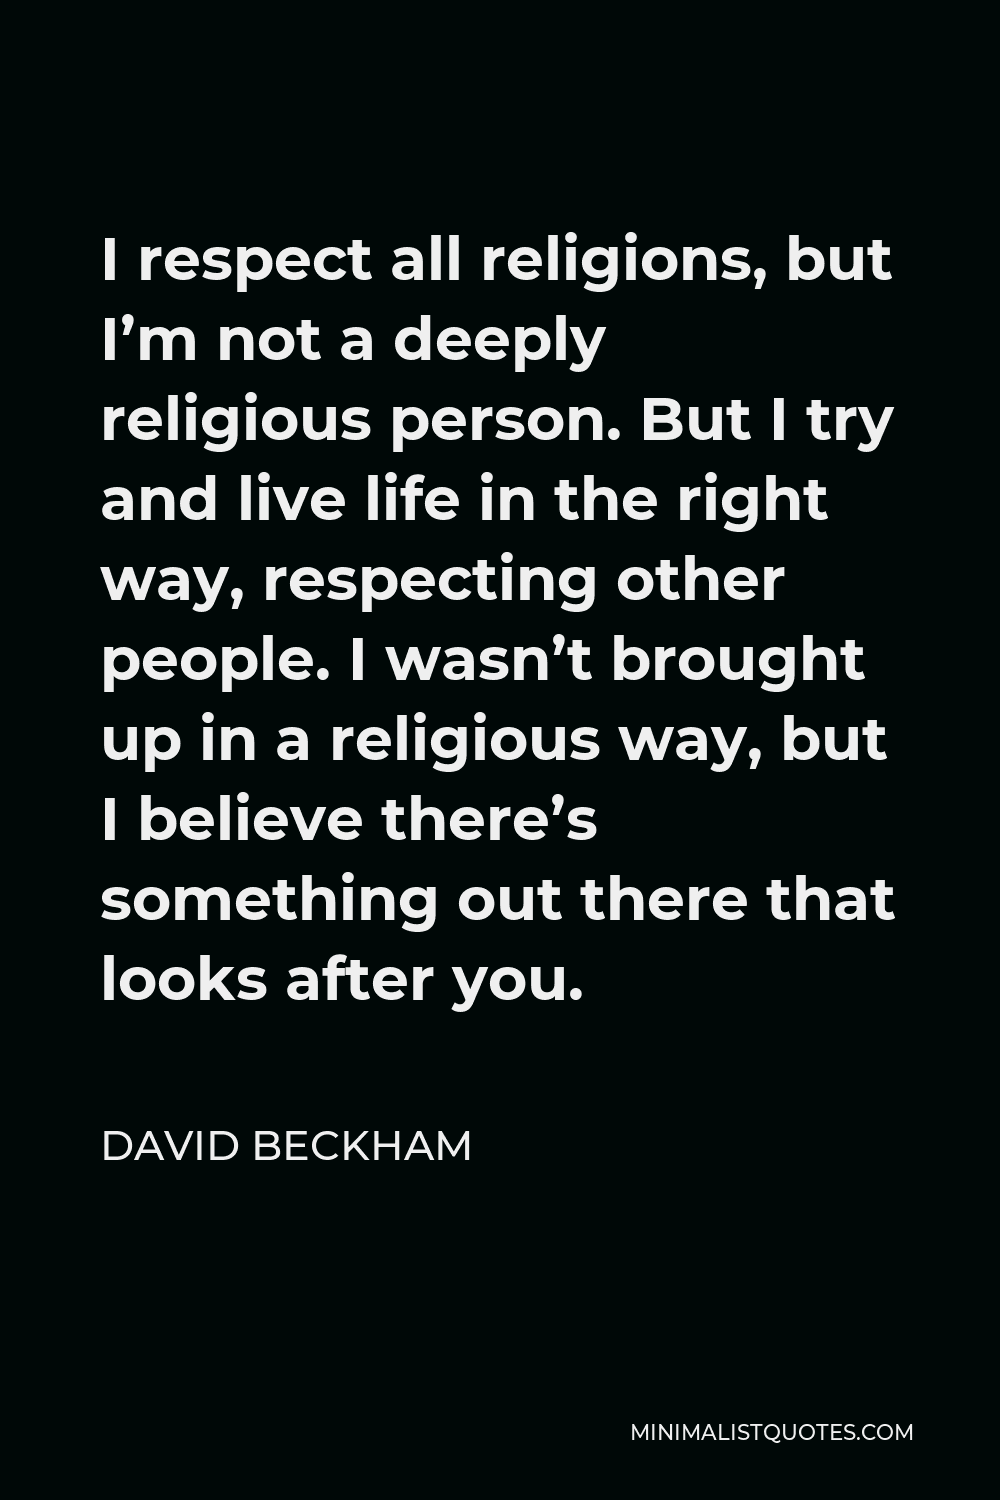 David Beckham Quote - I respect all religions, but I’m not a deeply religious person. But I try and live life in the right way, respecting other people. I wasn’t brought up in a religious way, but I believe there’s something out there that looks after you.